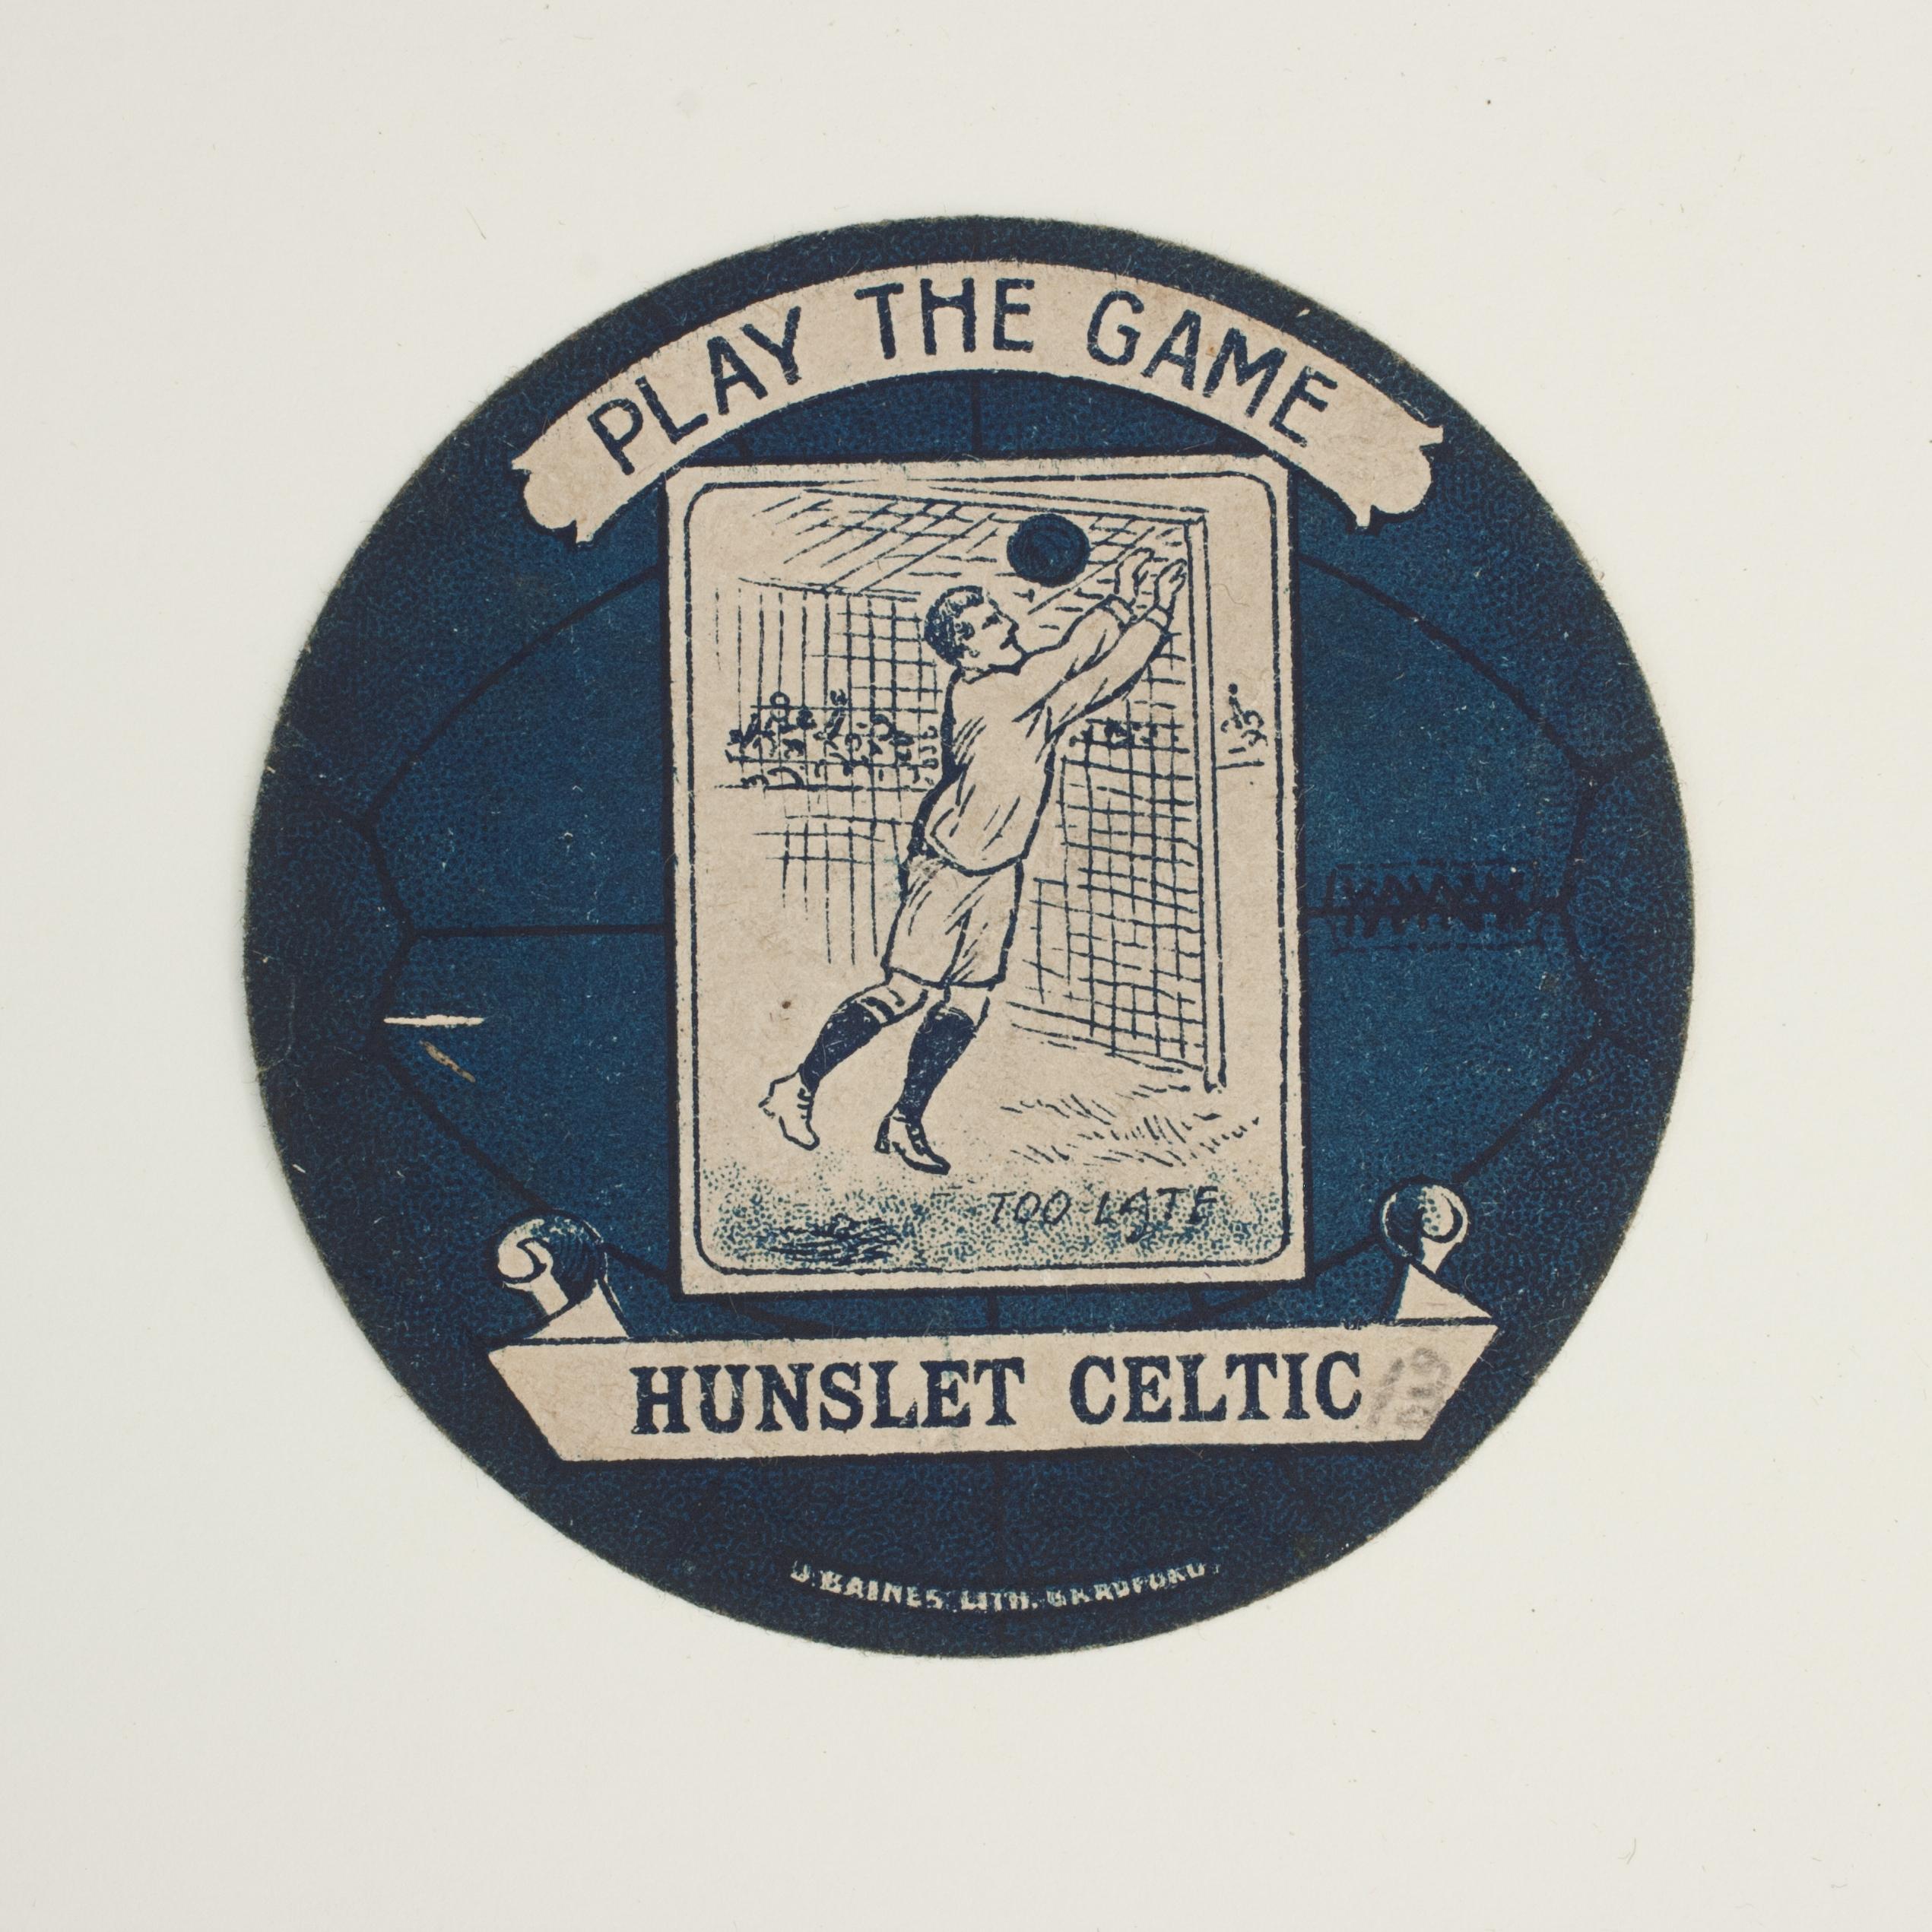 Sporting Art Baines Football Trade Card, Hunslet Celtic, Play The Game For Sale